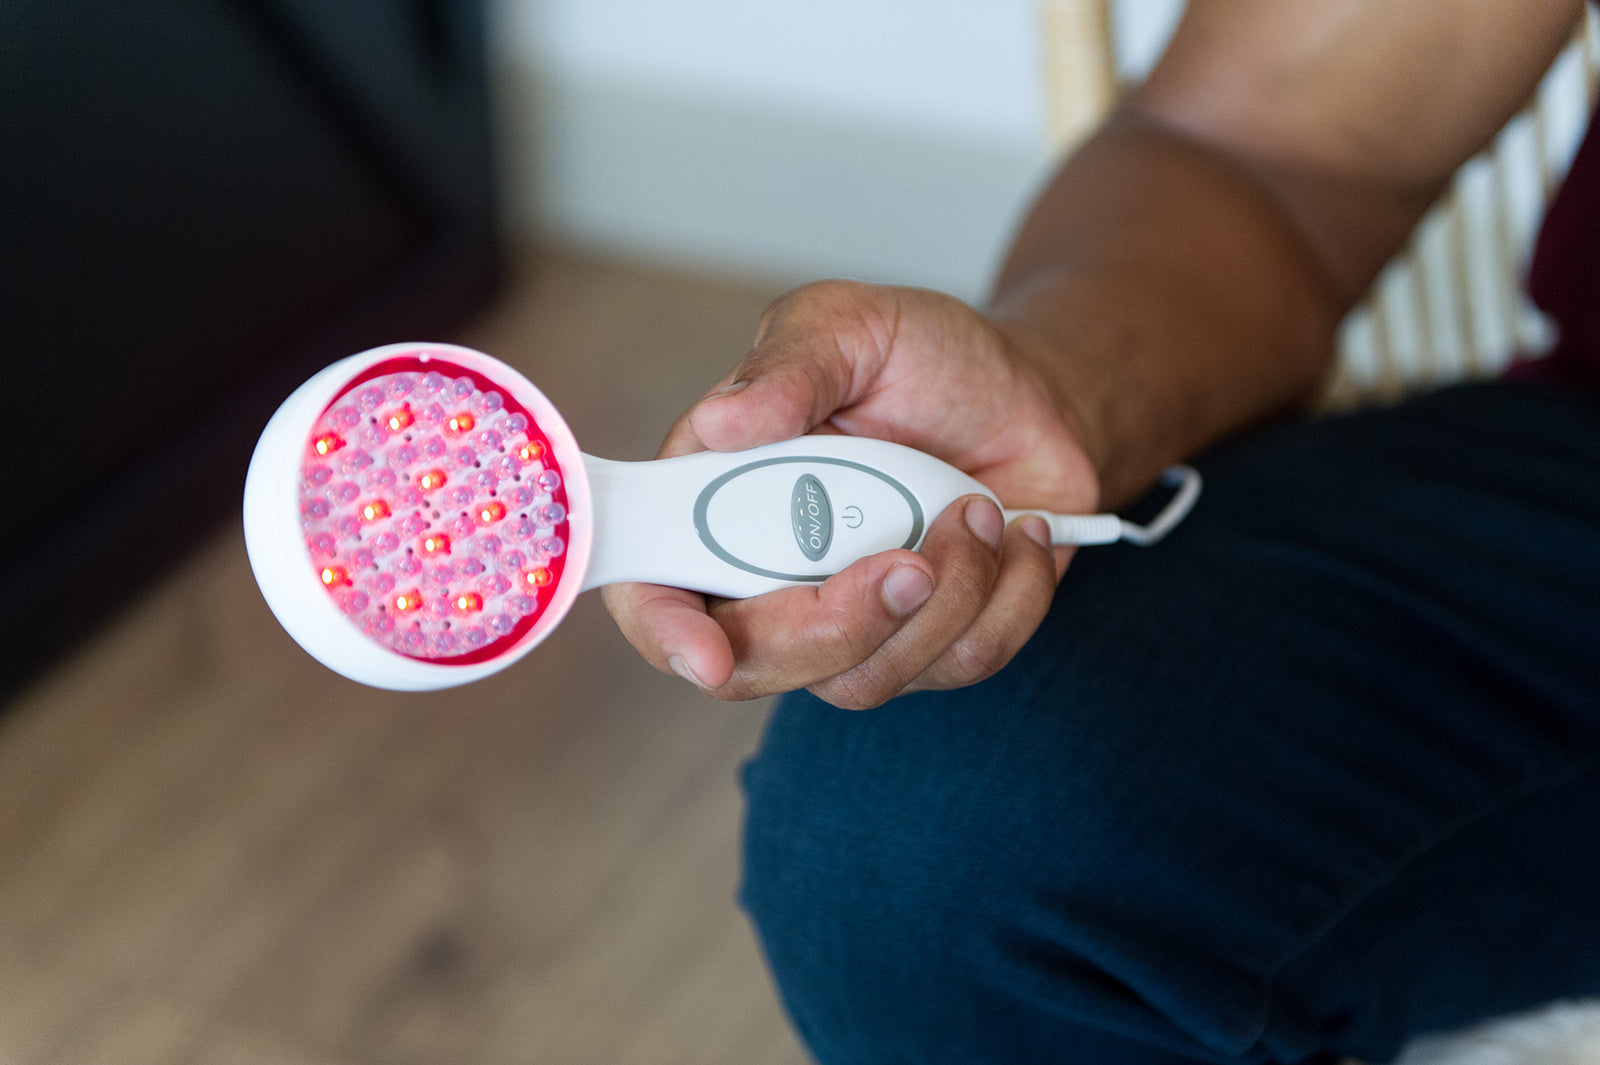 Clinical Led Light Therapy Pain Relief